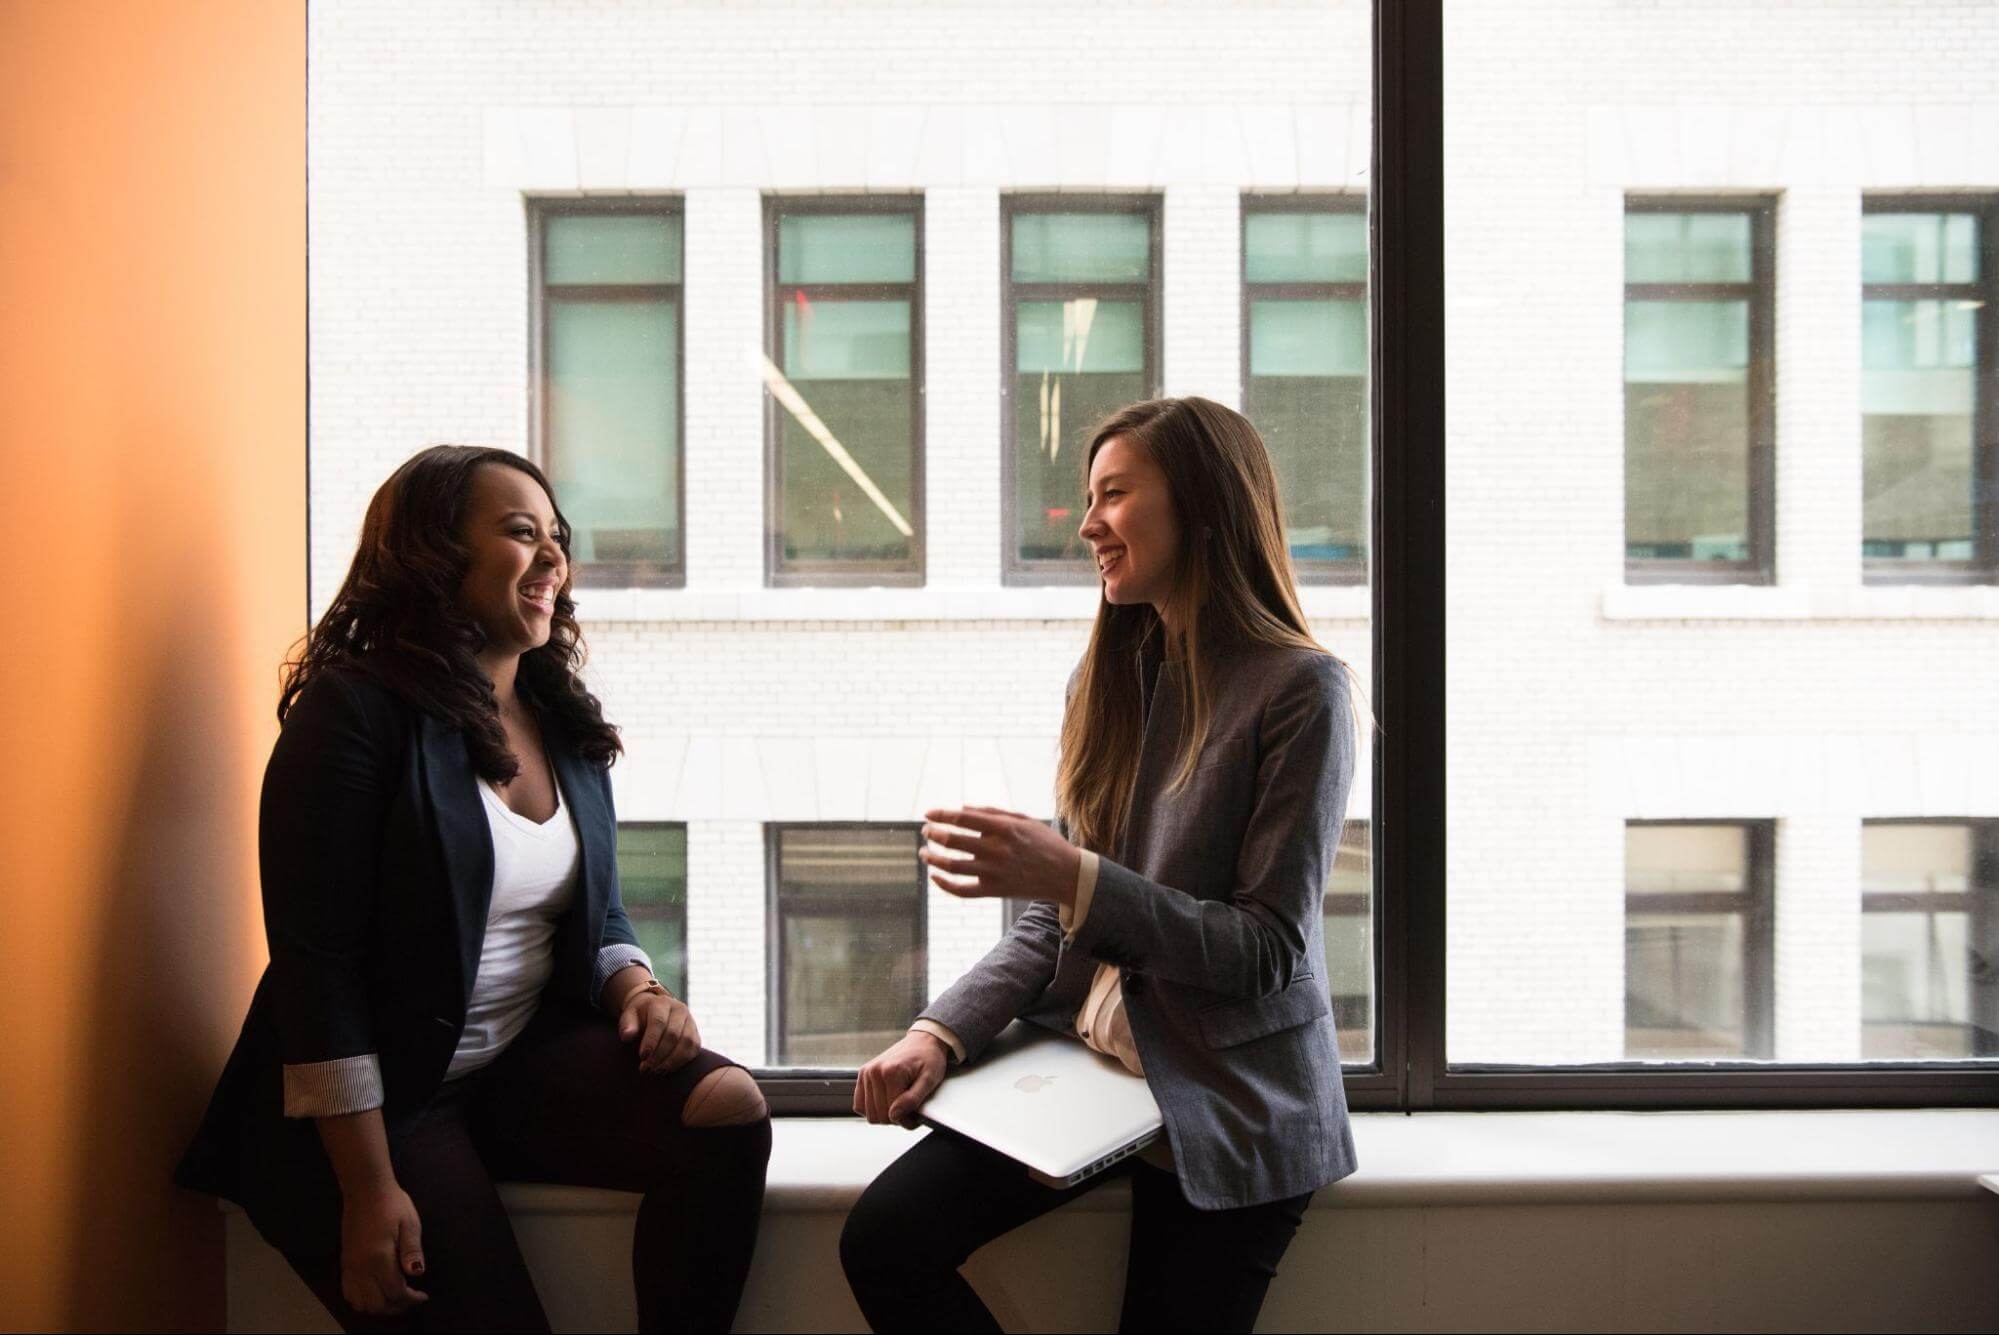 Two women smiling, chatting at window in office